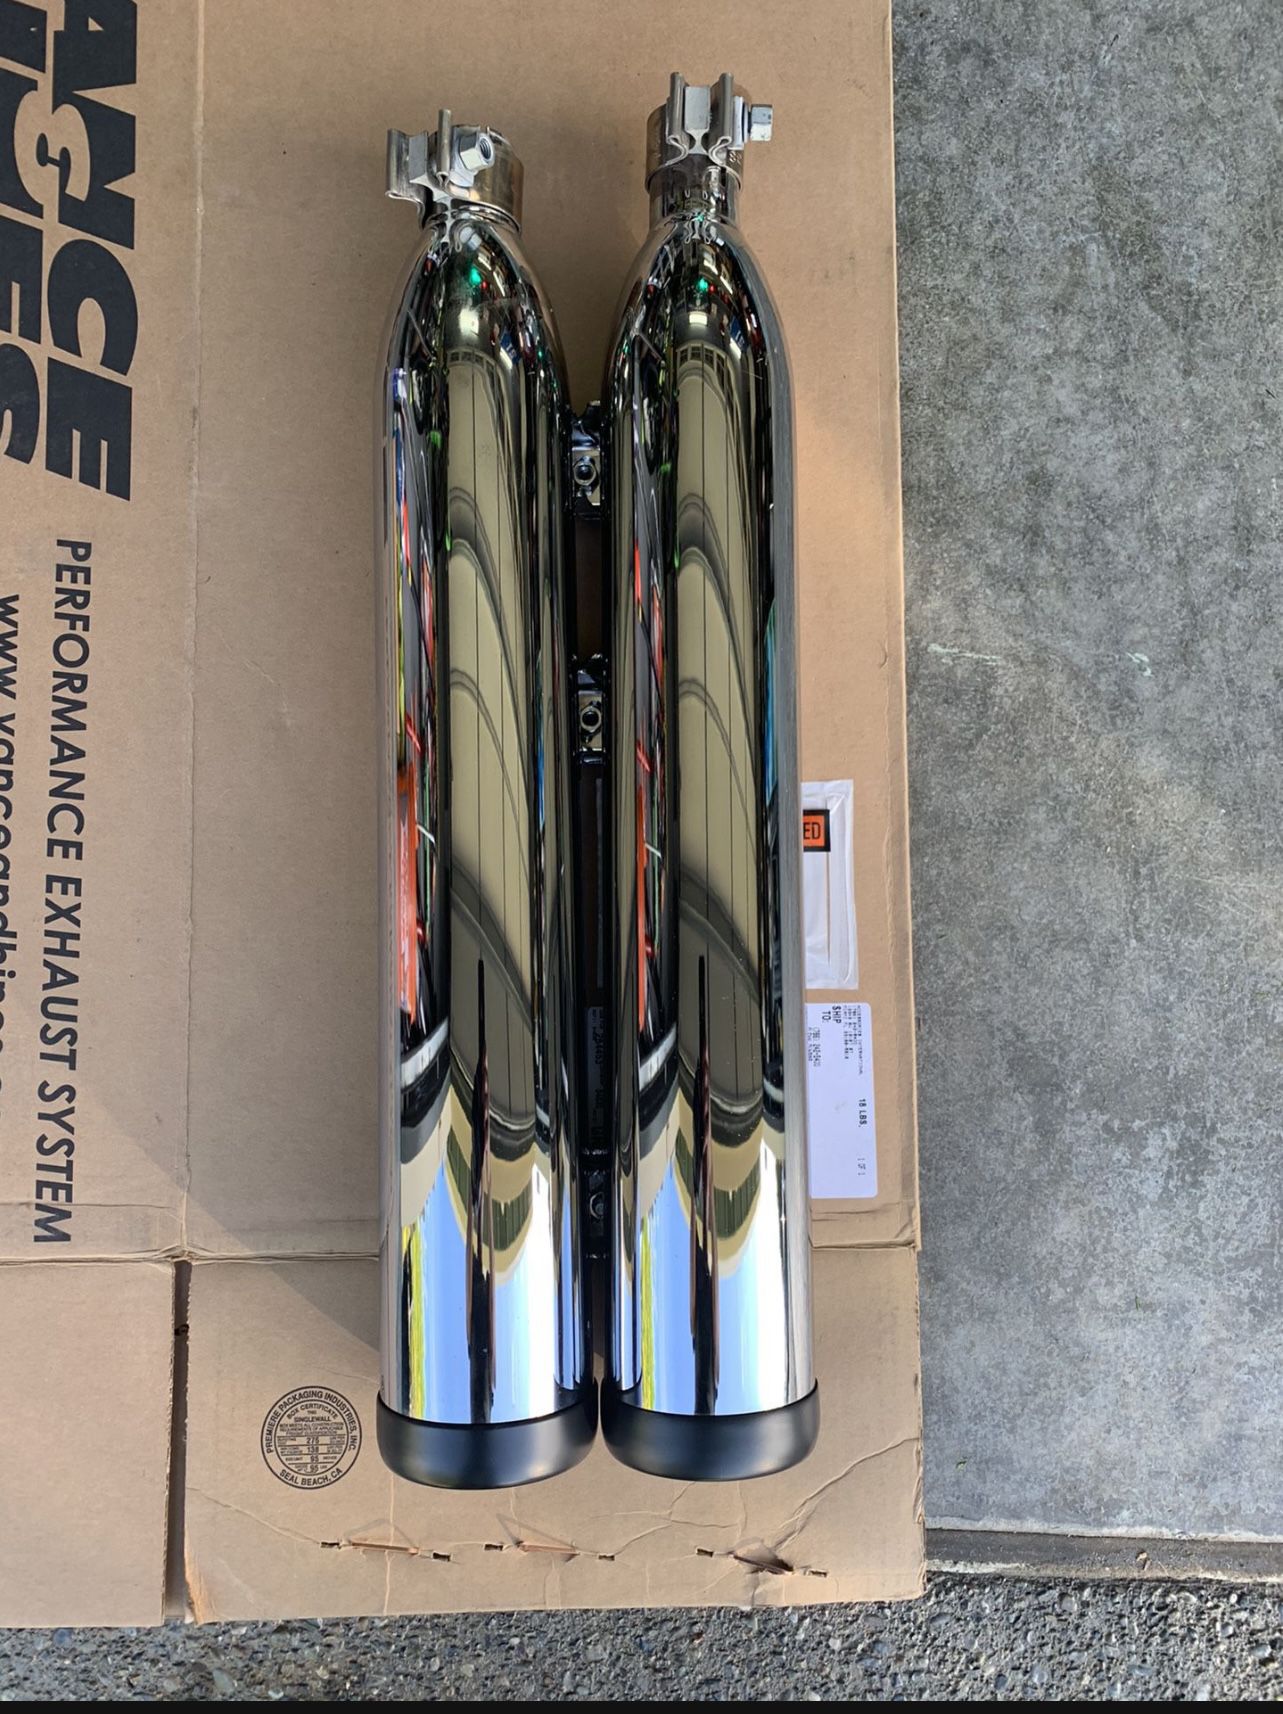 2018 Indian Scout stock mufflers, $50!